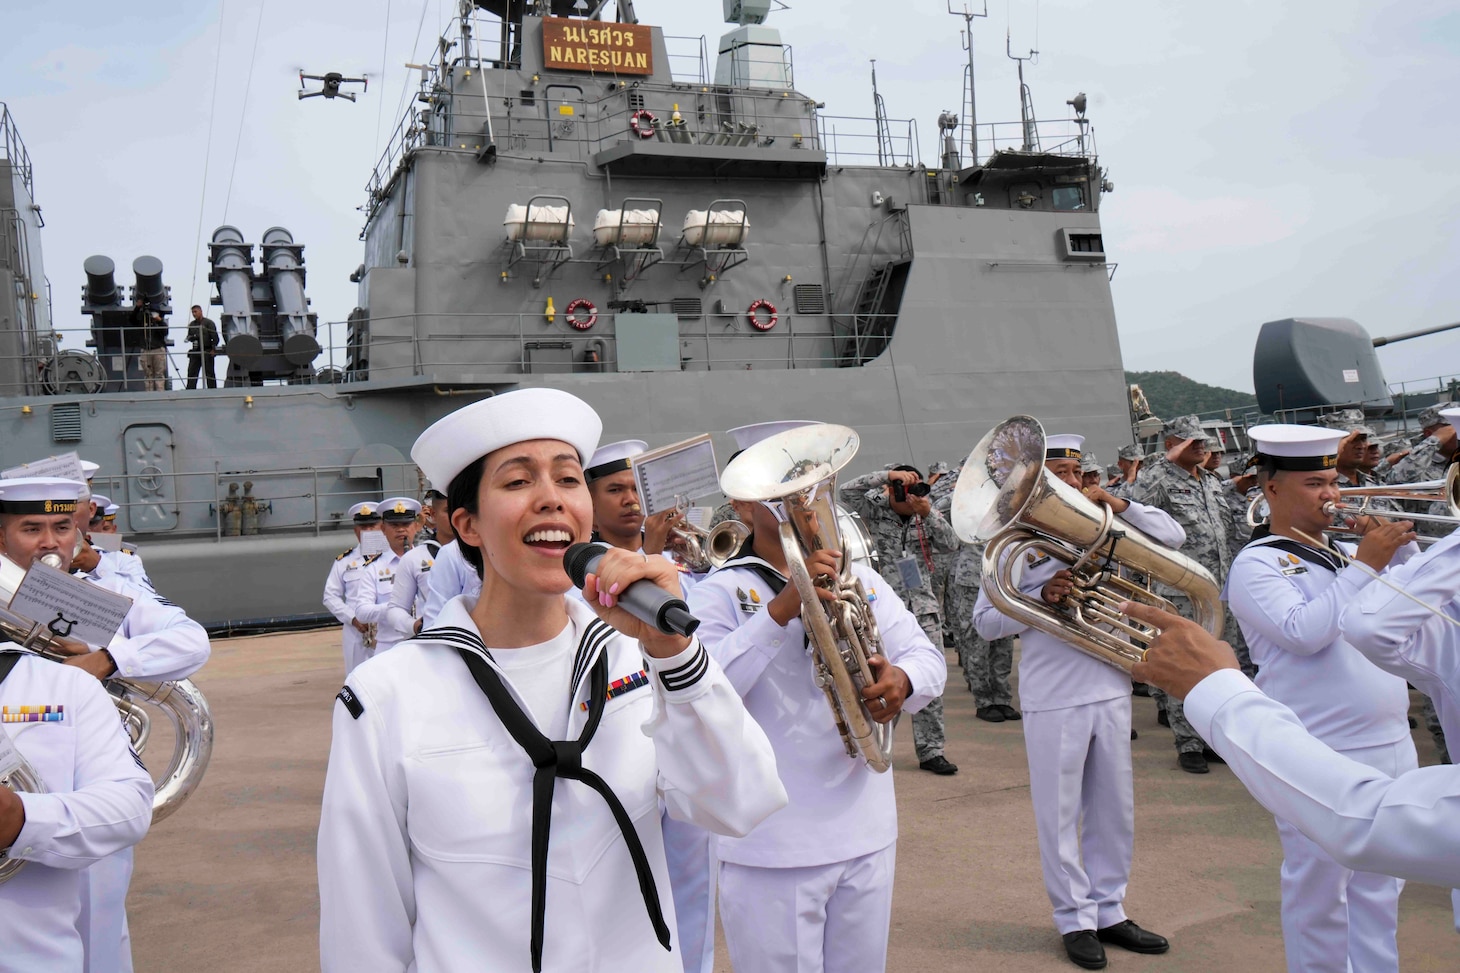 Musician 3rd Class Marisol Arreola sings the U.S. national anthem during the opening ceremony of Cooperation Afloat Readiness and Training (CARAT)/Marine Exercise (MAREX) Thailand 2023 at Royal Thai Fleet Headquarters, May 8. CARAT/MAREX Thailand is a bilateral exercise between the Kingdom of Thailand and United States to promote regional security cooperation, practice humanitarian assistance and disaster relief, and strengthen maritime understanding, partnerships and interoperability. Thailand has been part of the CARAT exercise series since 1995. In its 29th year, the CARAT series is comprised of multinational exercises, designed to enhance U.S. and partner forces’ abilities to operate together in response to traditional and non-traditional maritime security challenges in the Indo-Pacific region.